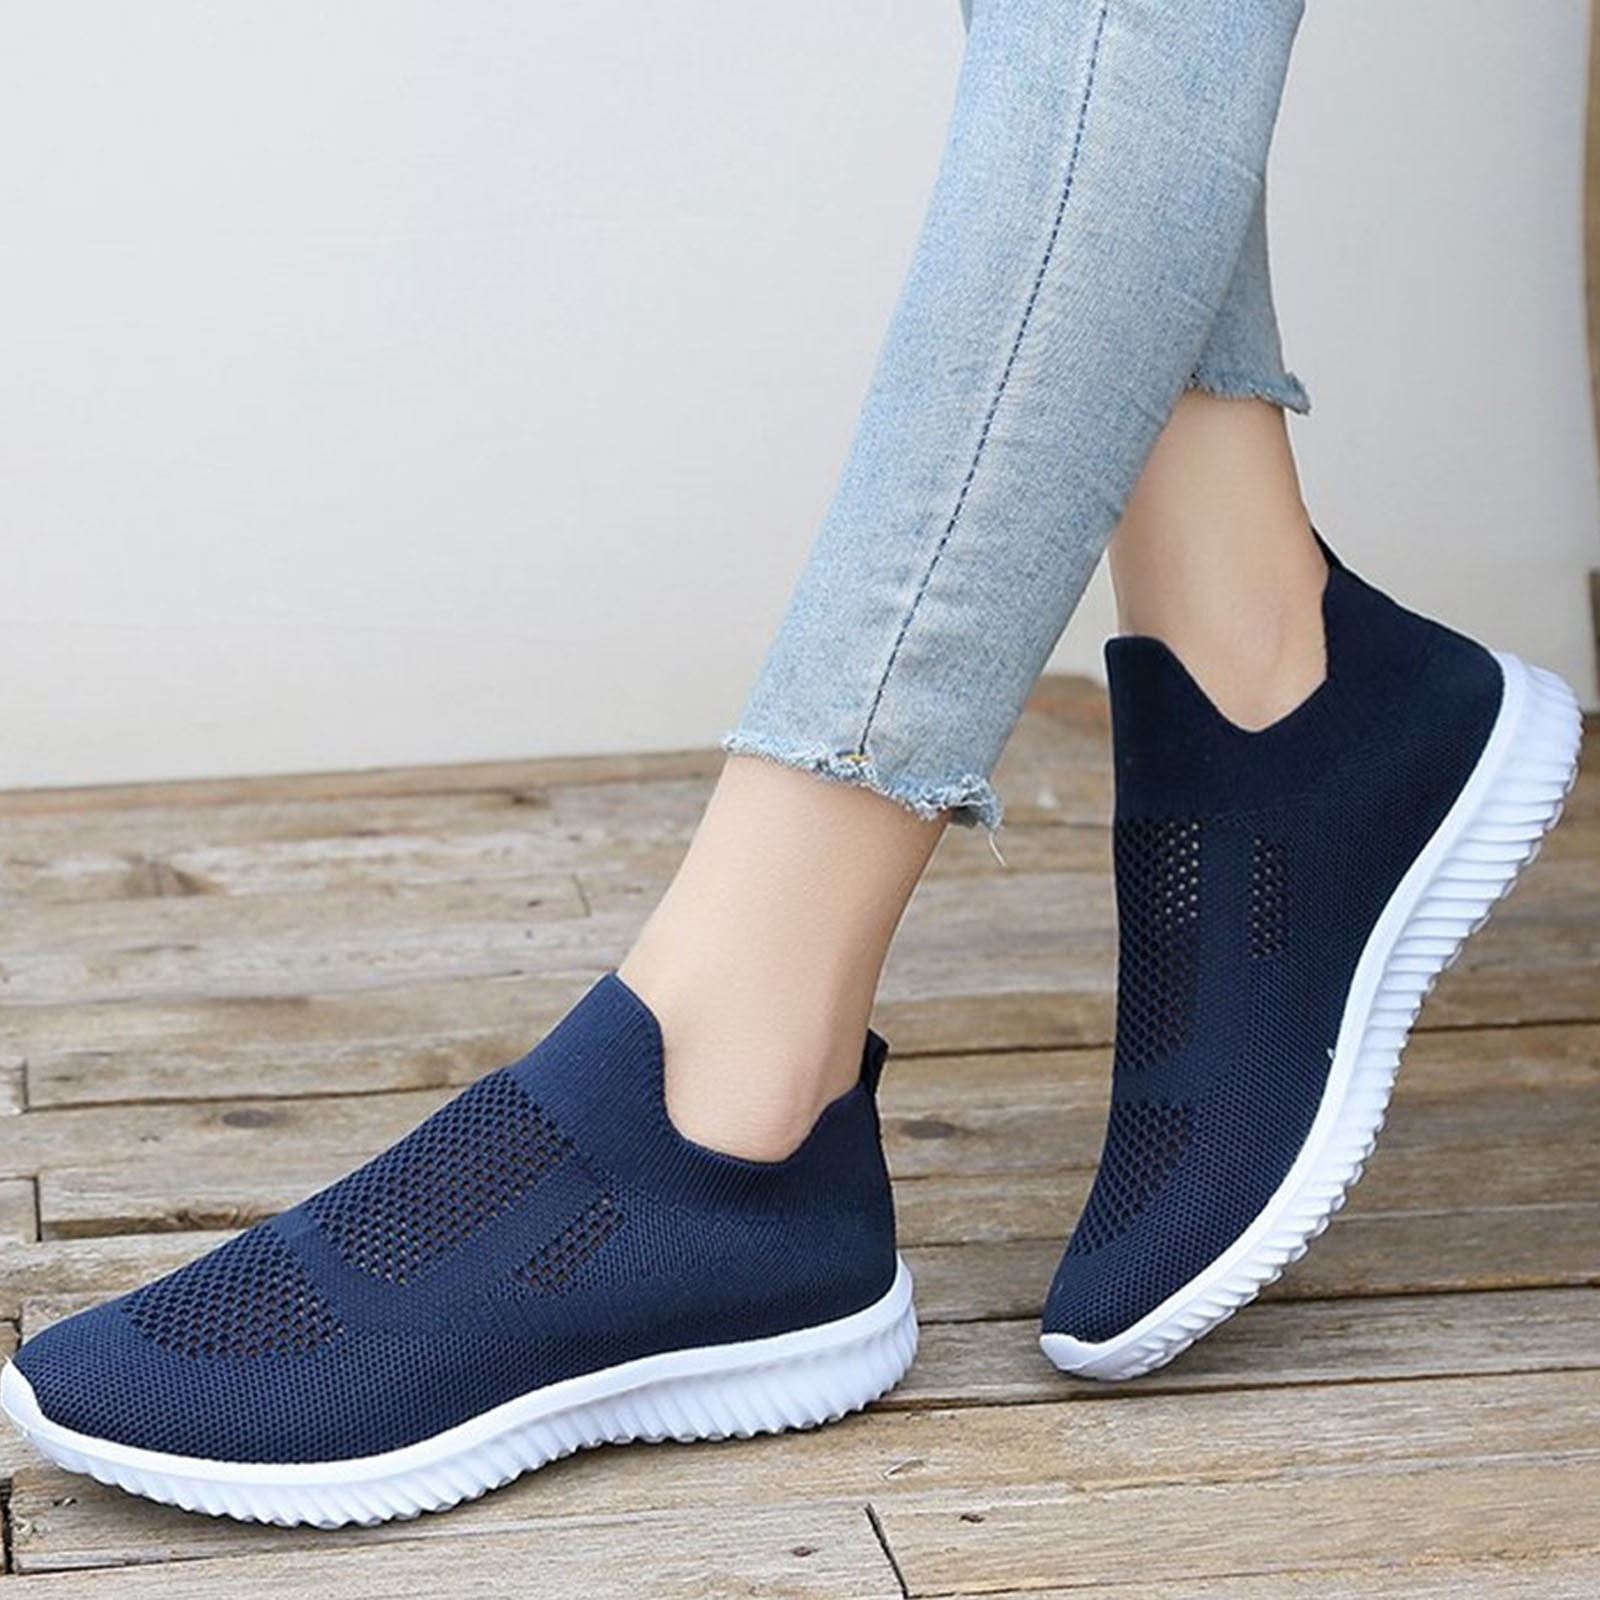 Women's Shoes Fashion All-match Lightweight Breathable Casual Sports Super Star Slip on Sneakers for Women Hidden Wedge Sneakers Women 2.5 Inch All Womens Work Women's Max Walmart.com